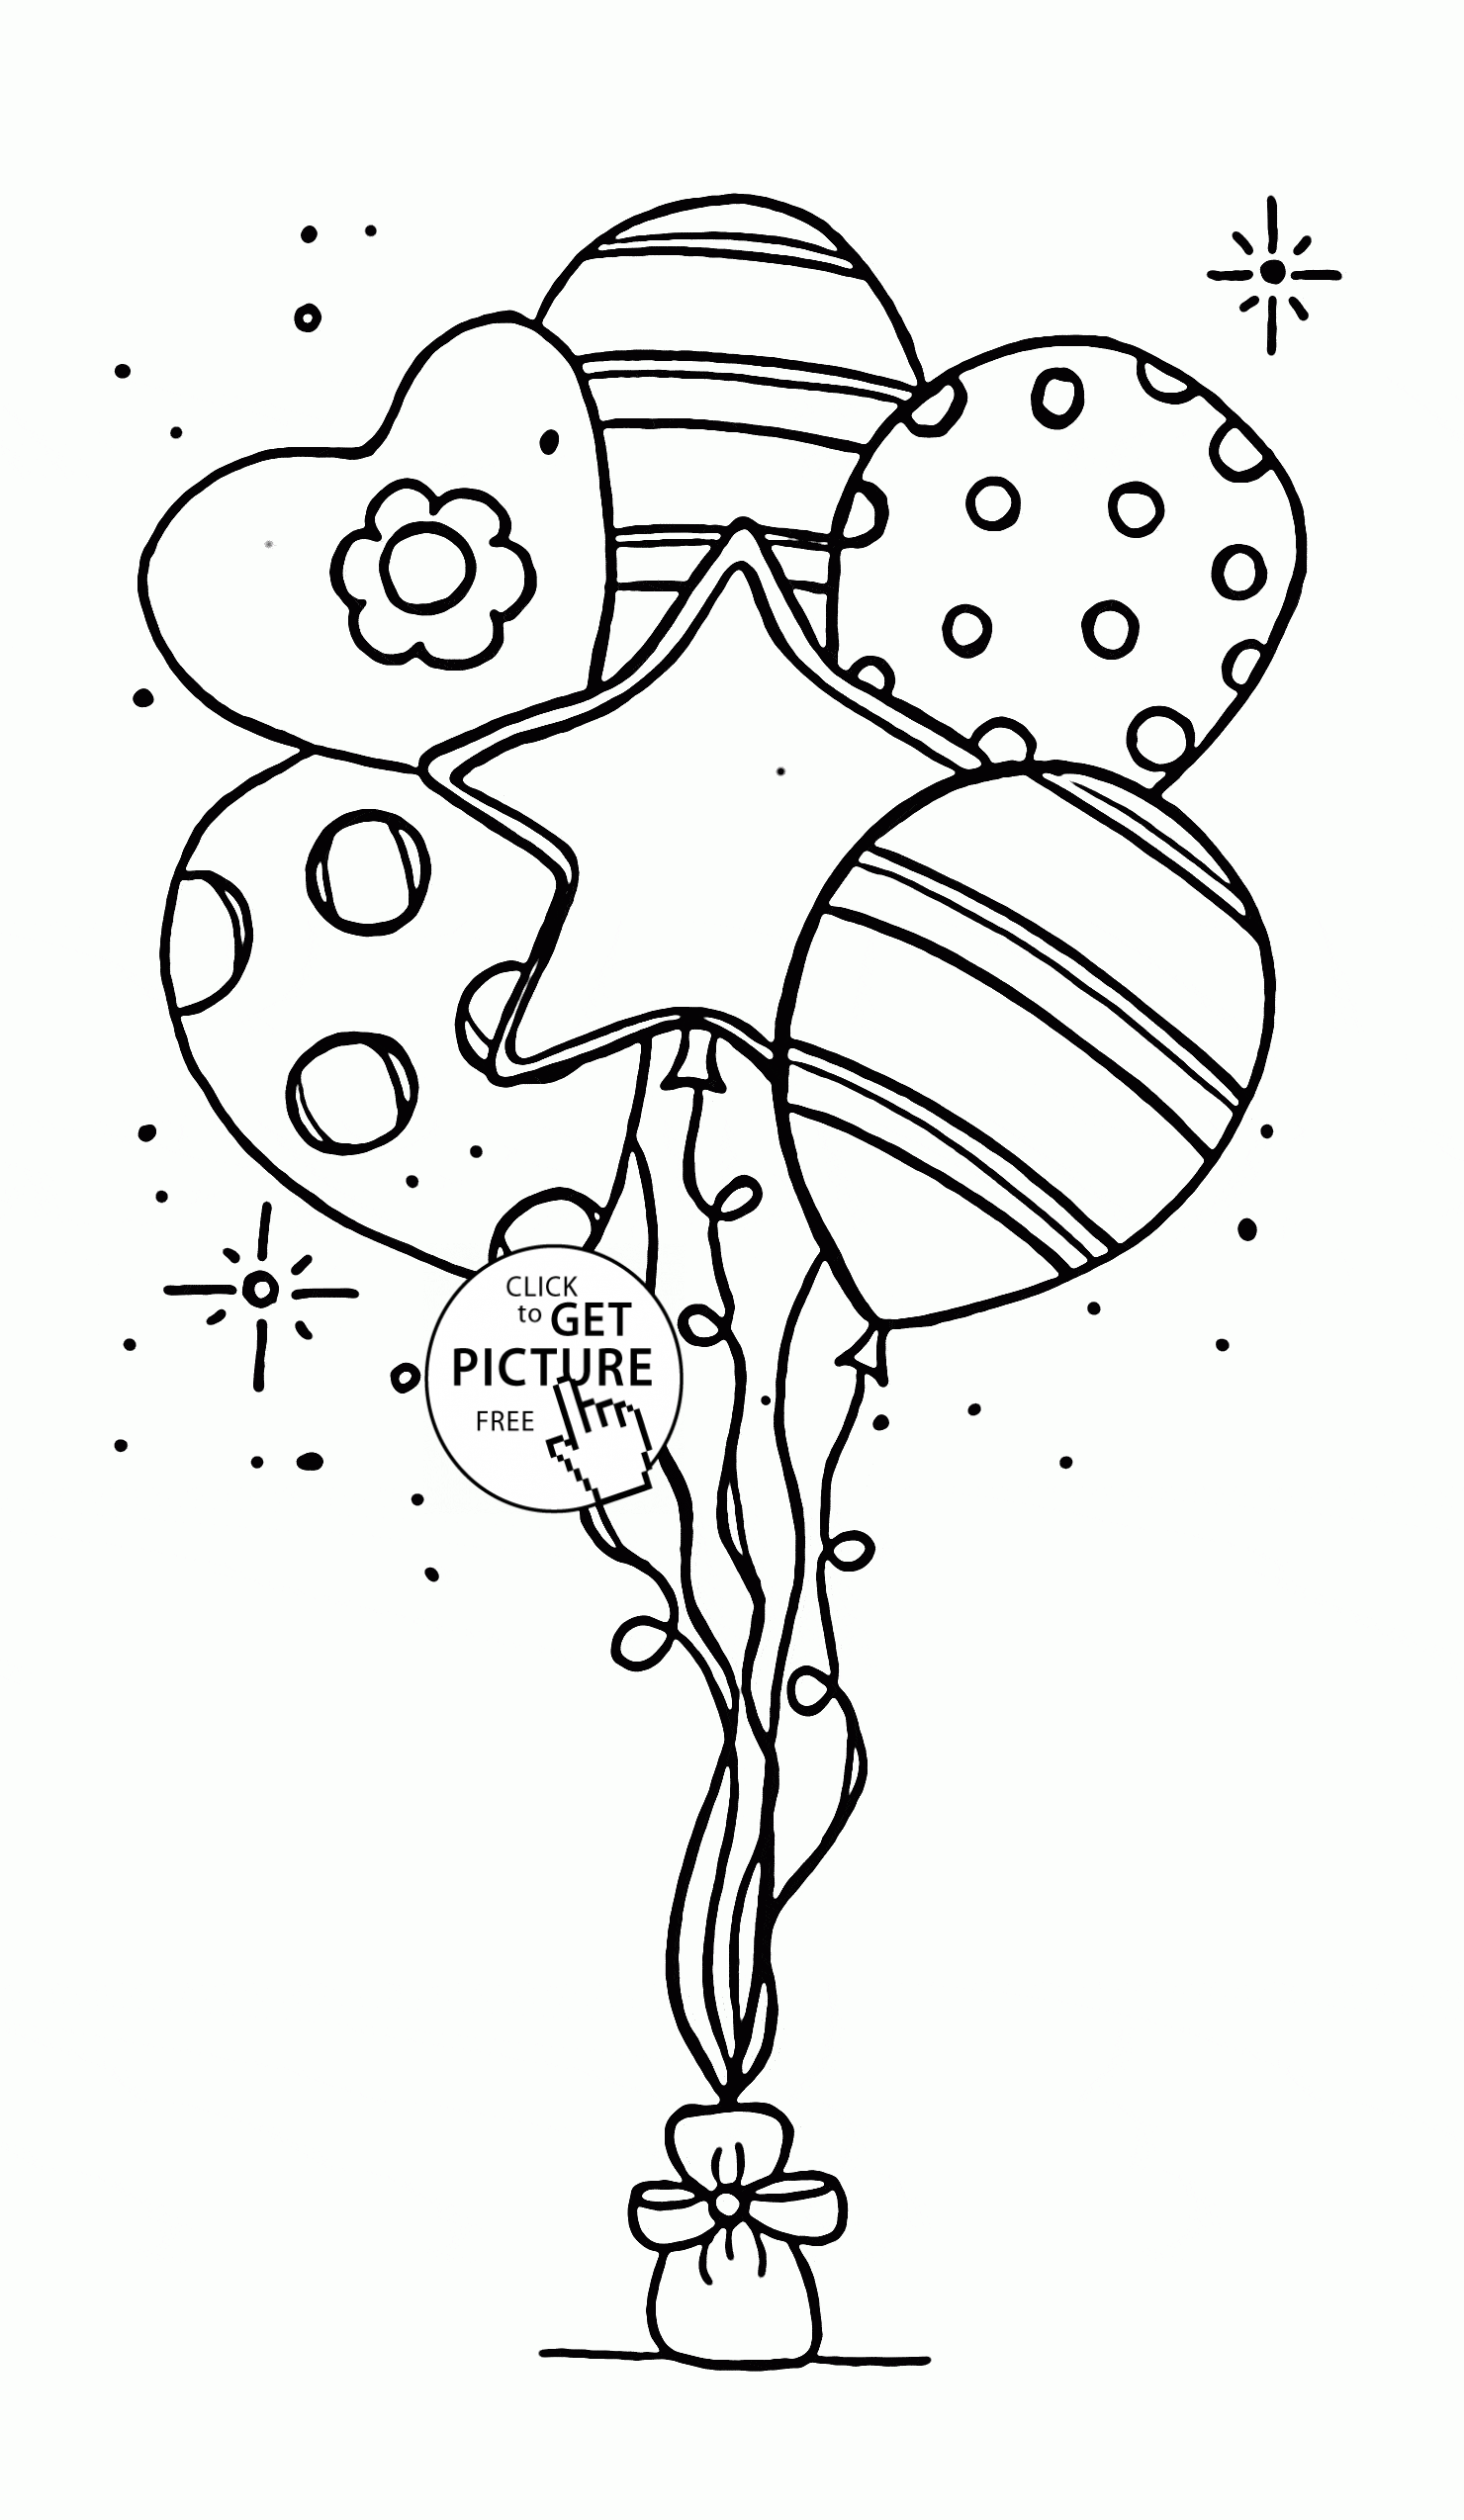 Printable Coloring Pages For A Birthday - Coloring Home